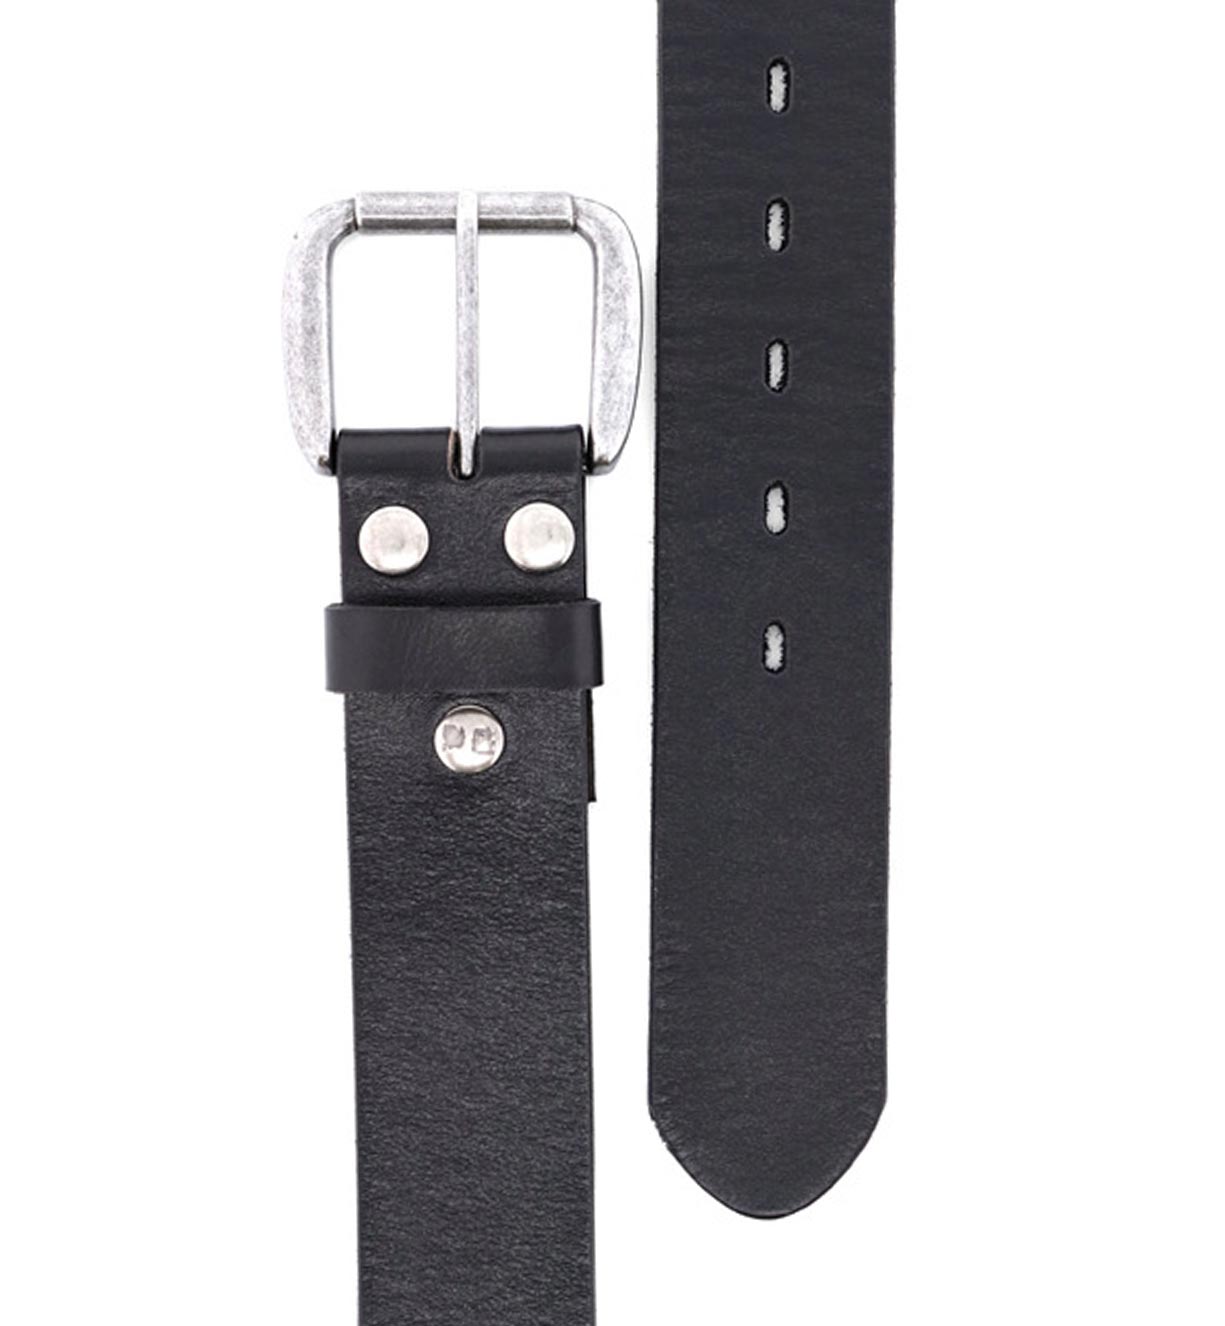 A Hobo black leather belt on a white background by Bed Stu